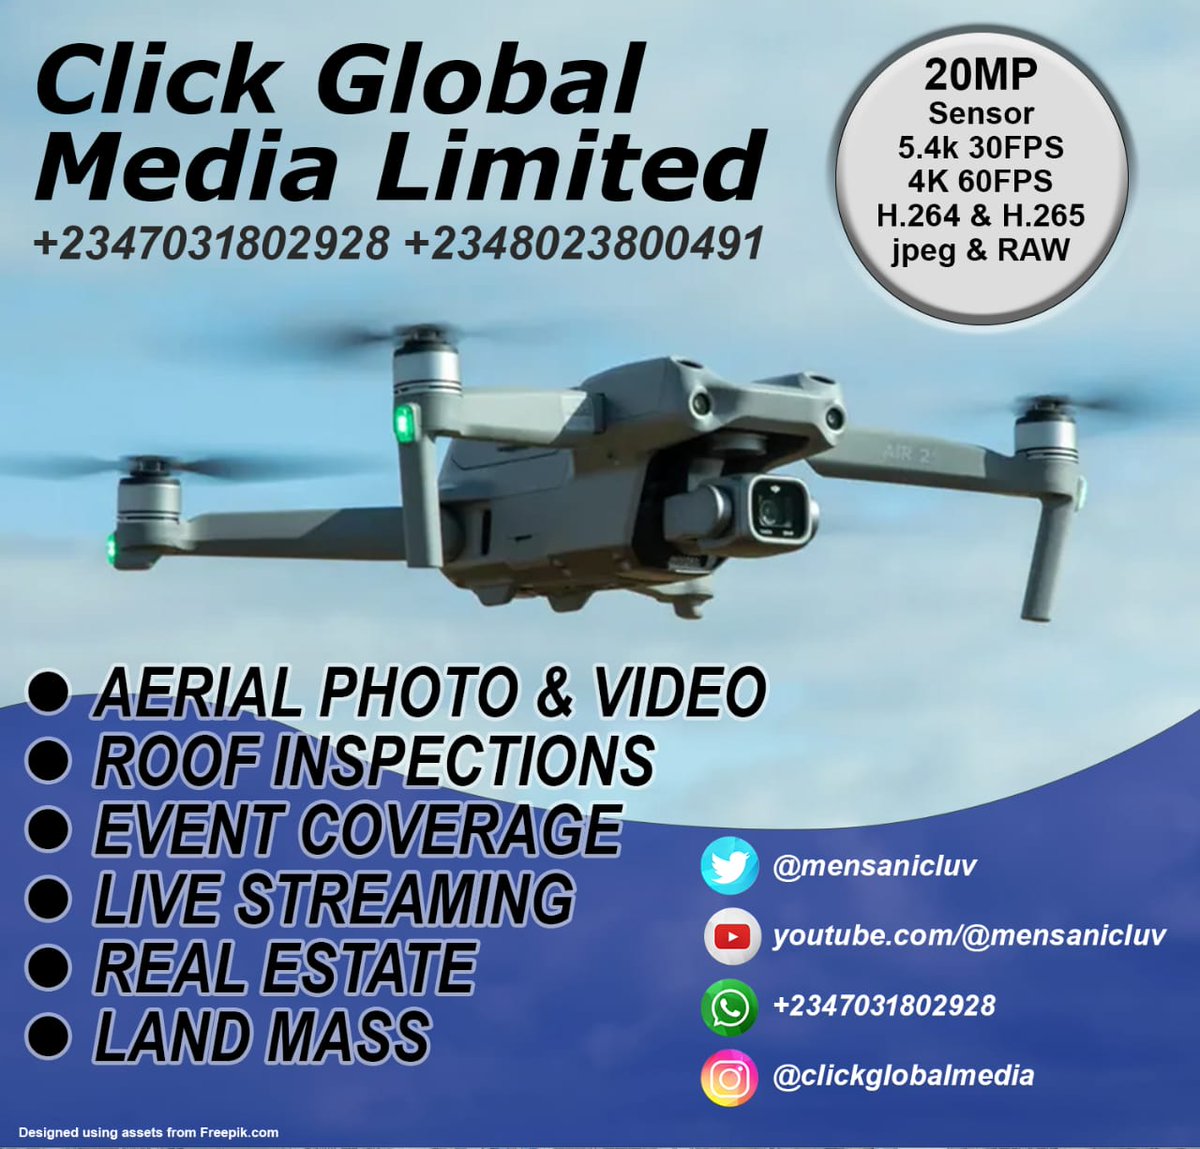 We are Open for your Drone Services. Call us or make us a referral. Thanks